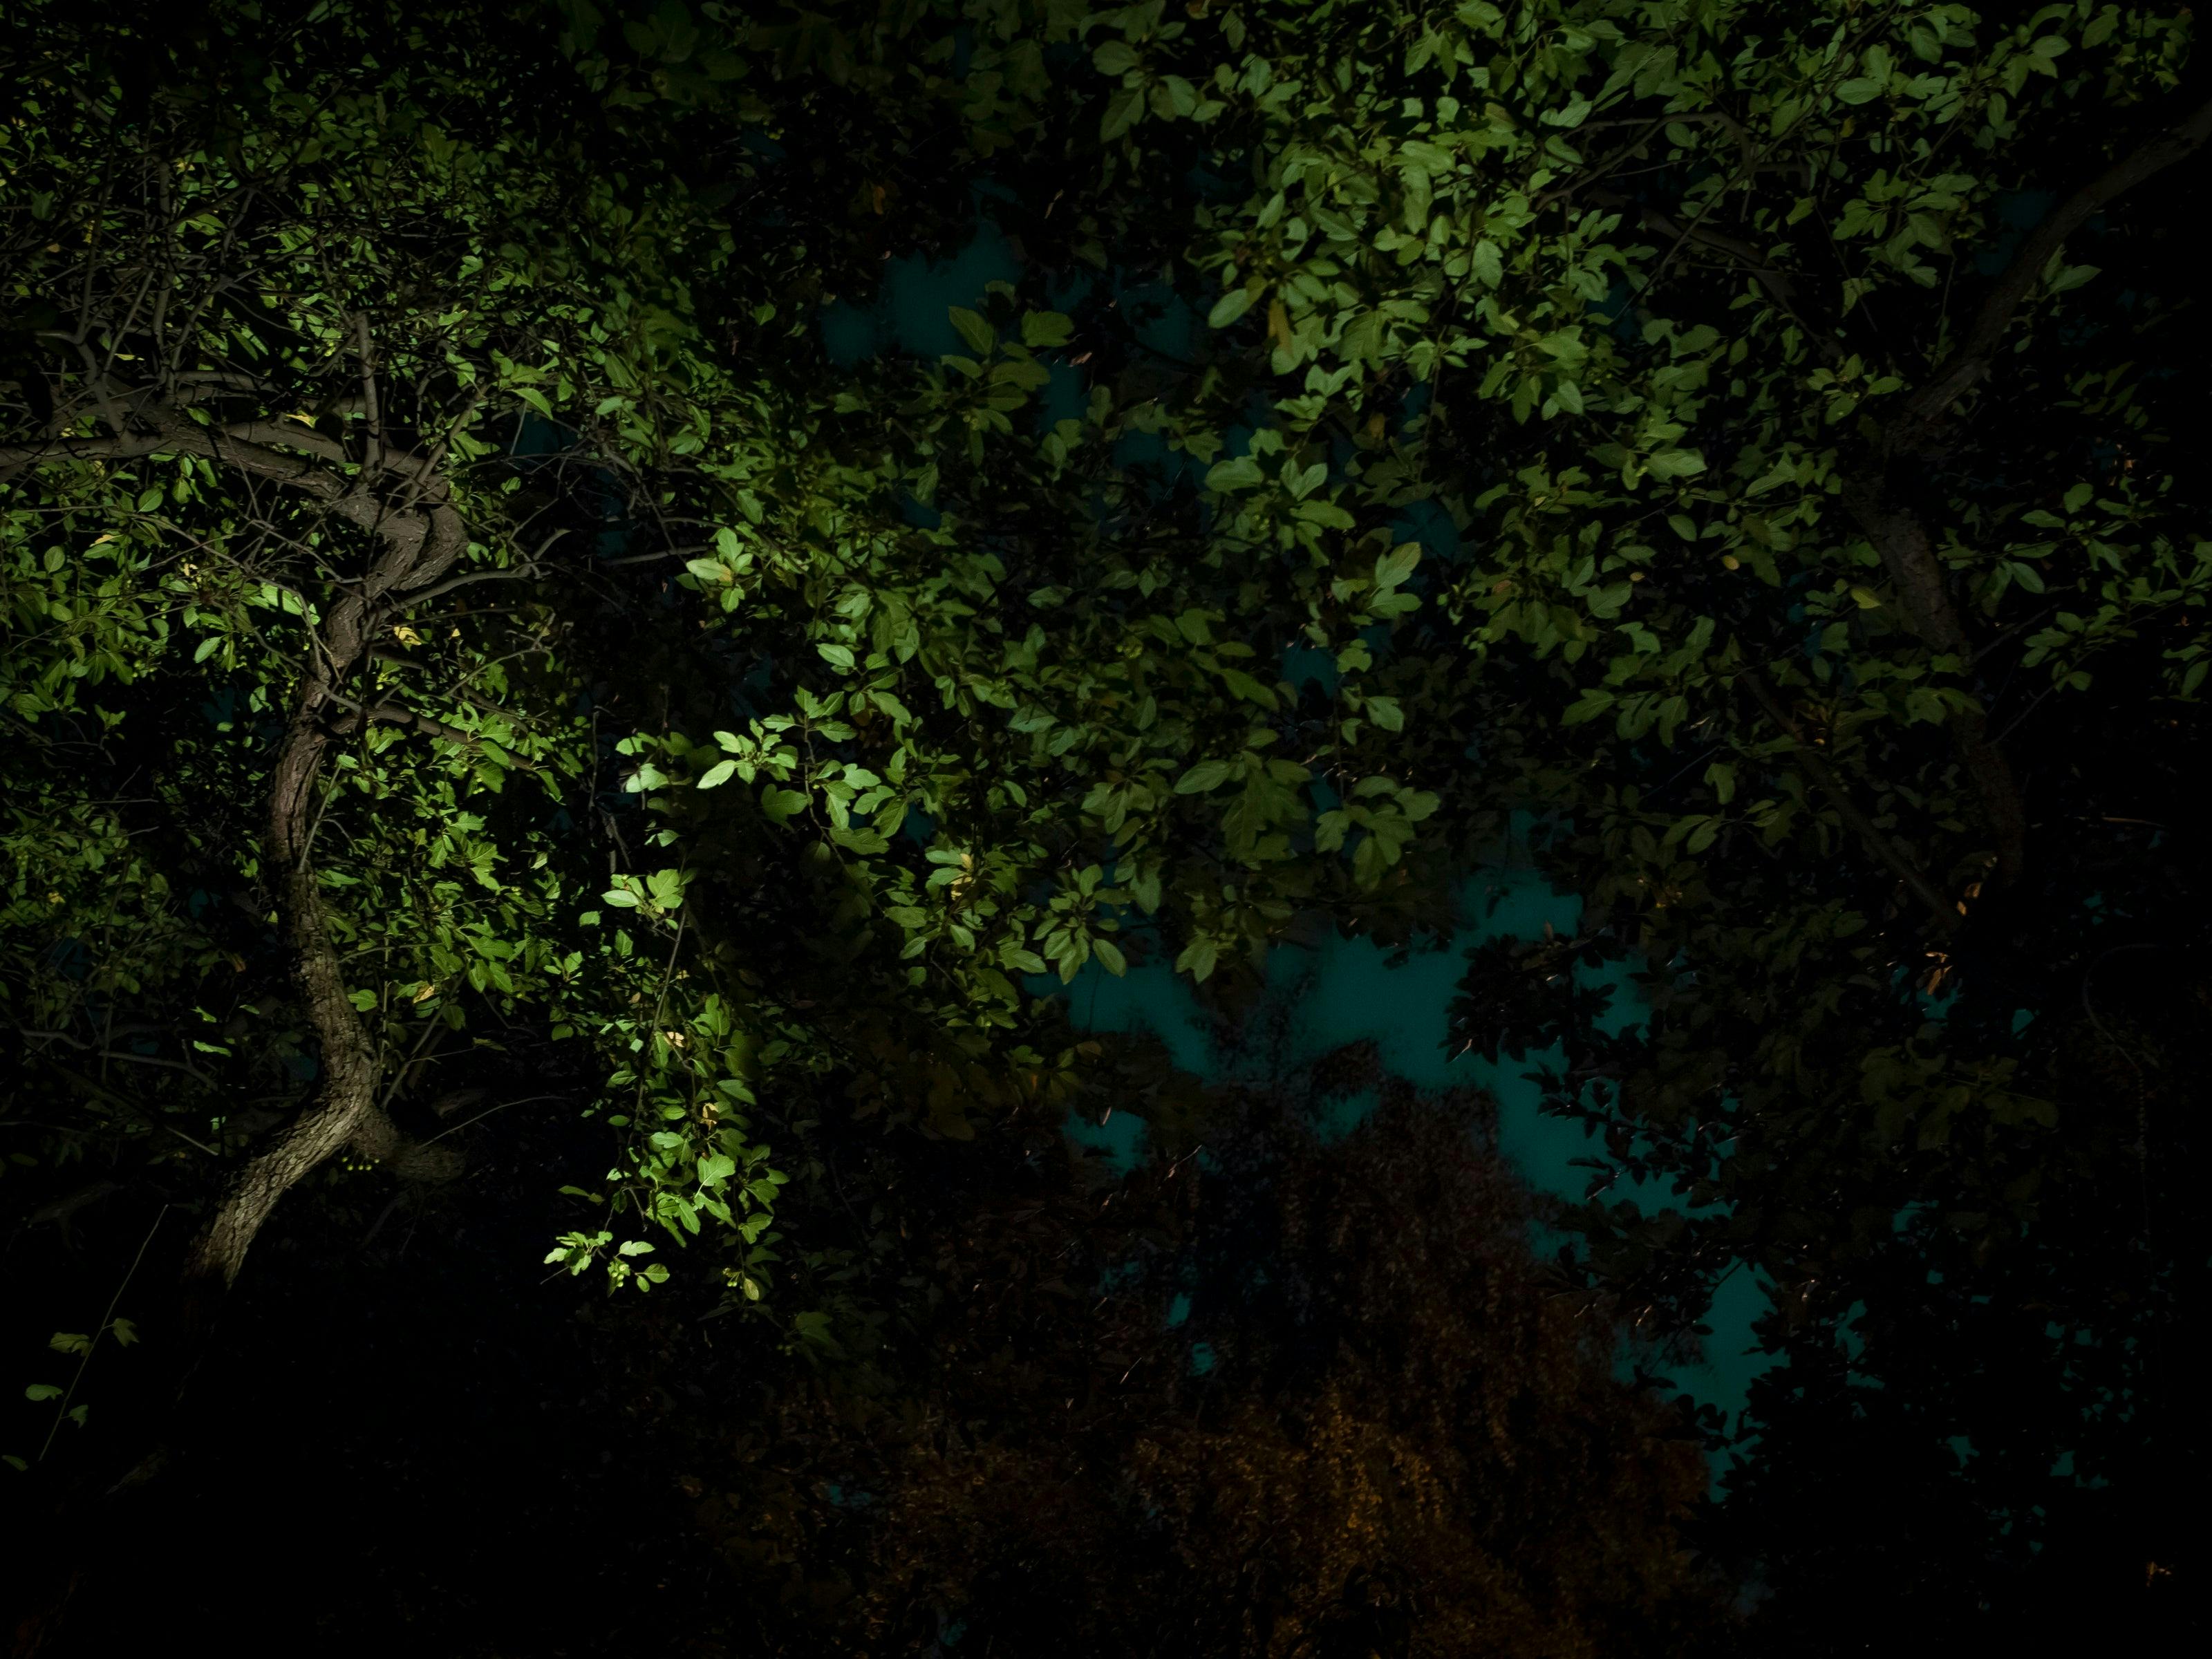 Photography by Anna Beeke titled "Midnight in the Garden #1".